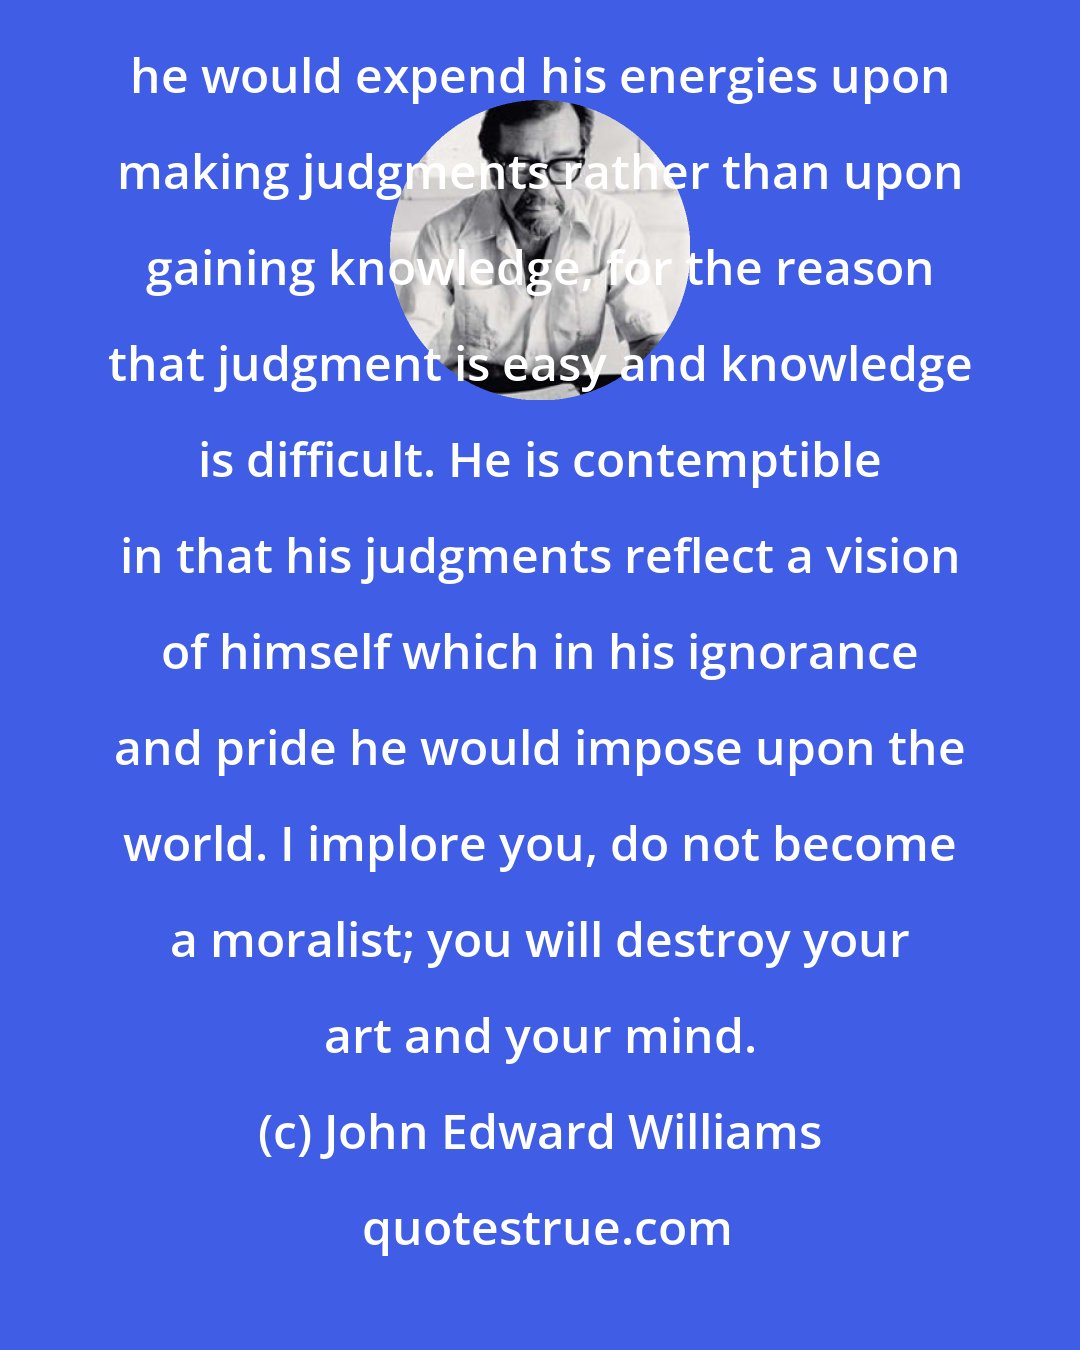 John Edward Williams: It seems to me that the moralist is the most useless and contemptible of creatures. He is useless in that he would expend his energies upon making judgments rather than upon gaining knowledge, for the reason that judgment is easy and knowledge is difficult. He is contemptible in that his judgments reflect a vision of himself which in his ignorance and pride he would impose upon the world. I implore you, do not become a moralist; you will destroy your art and your mind.